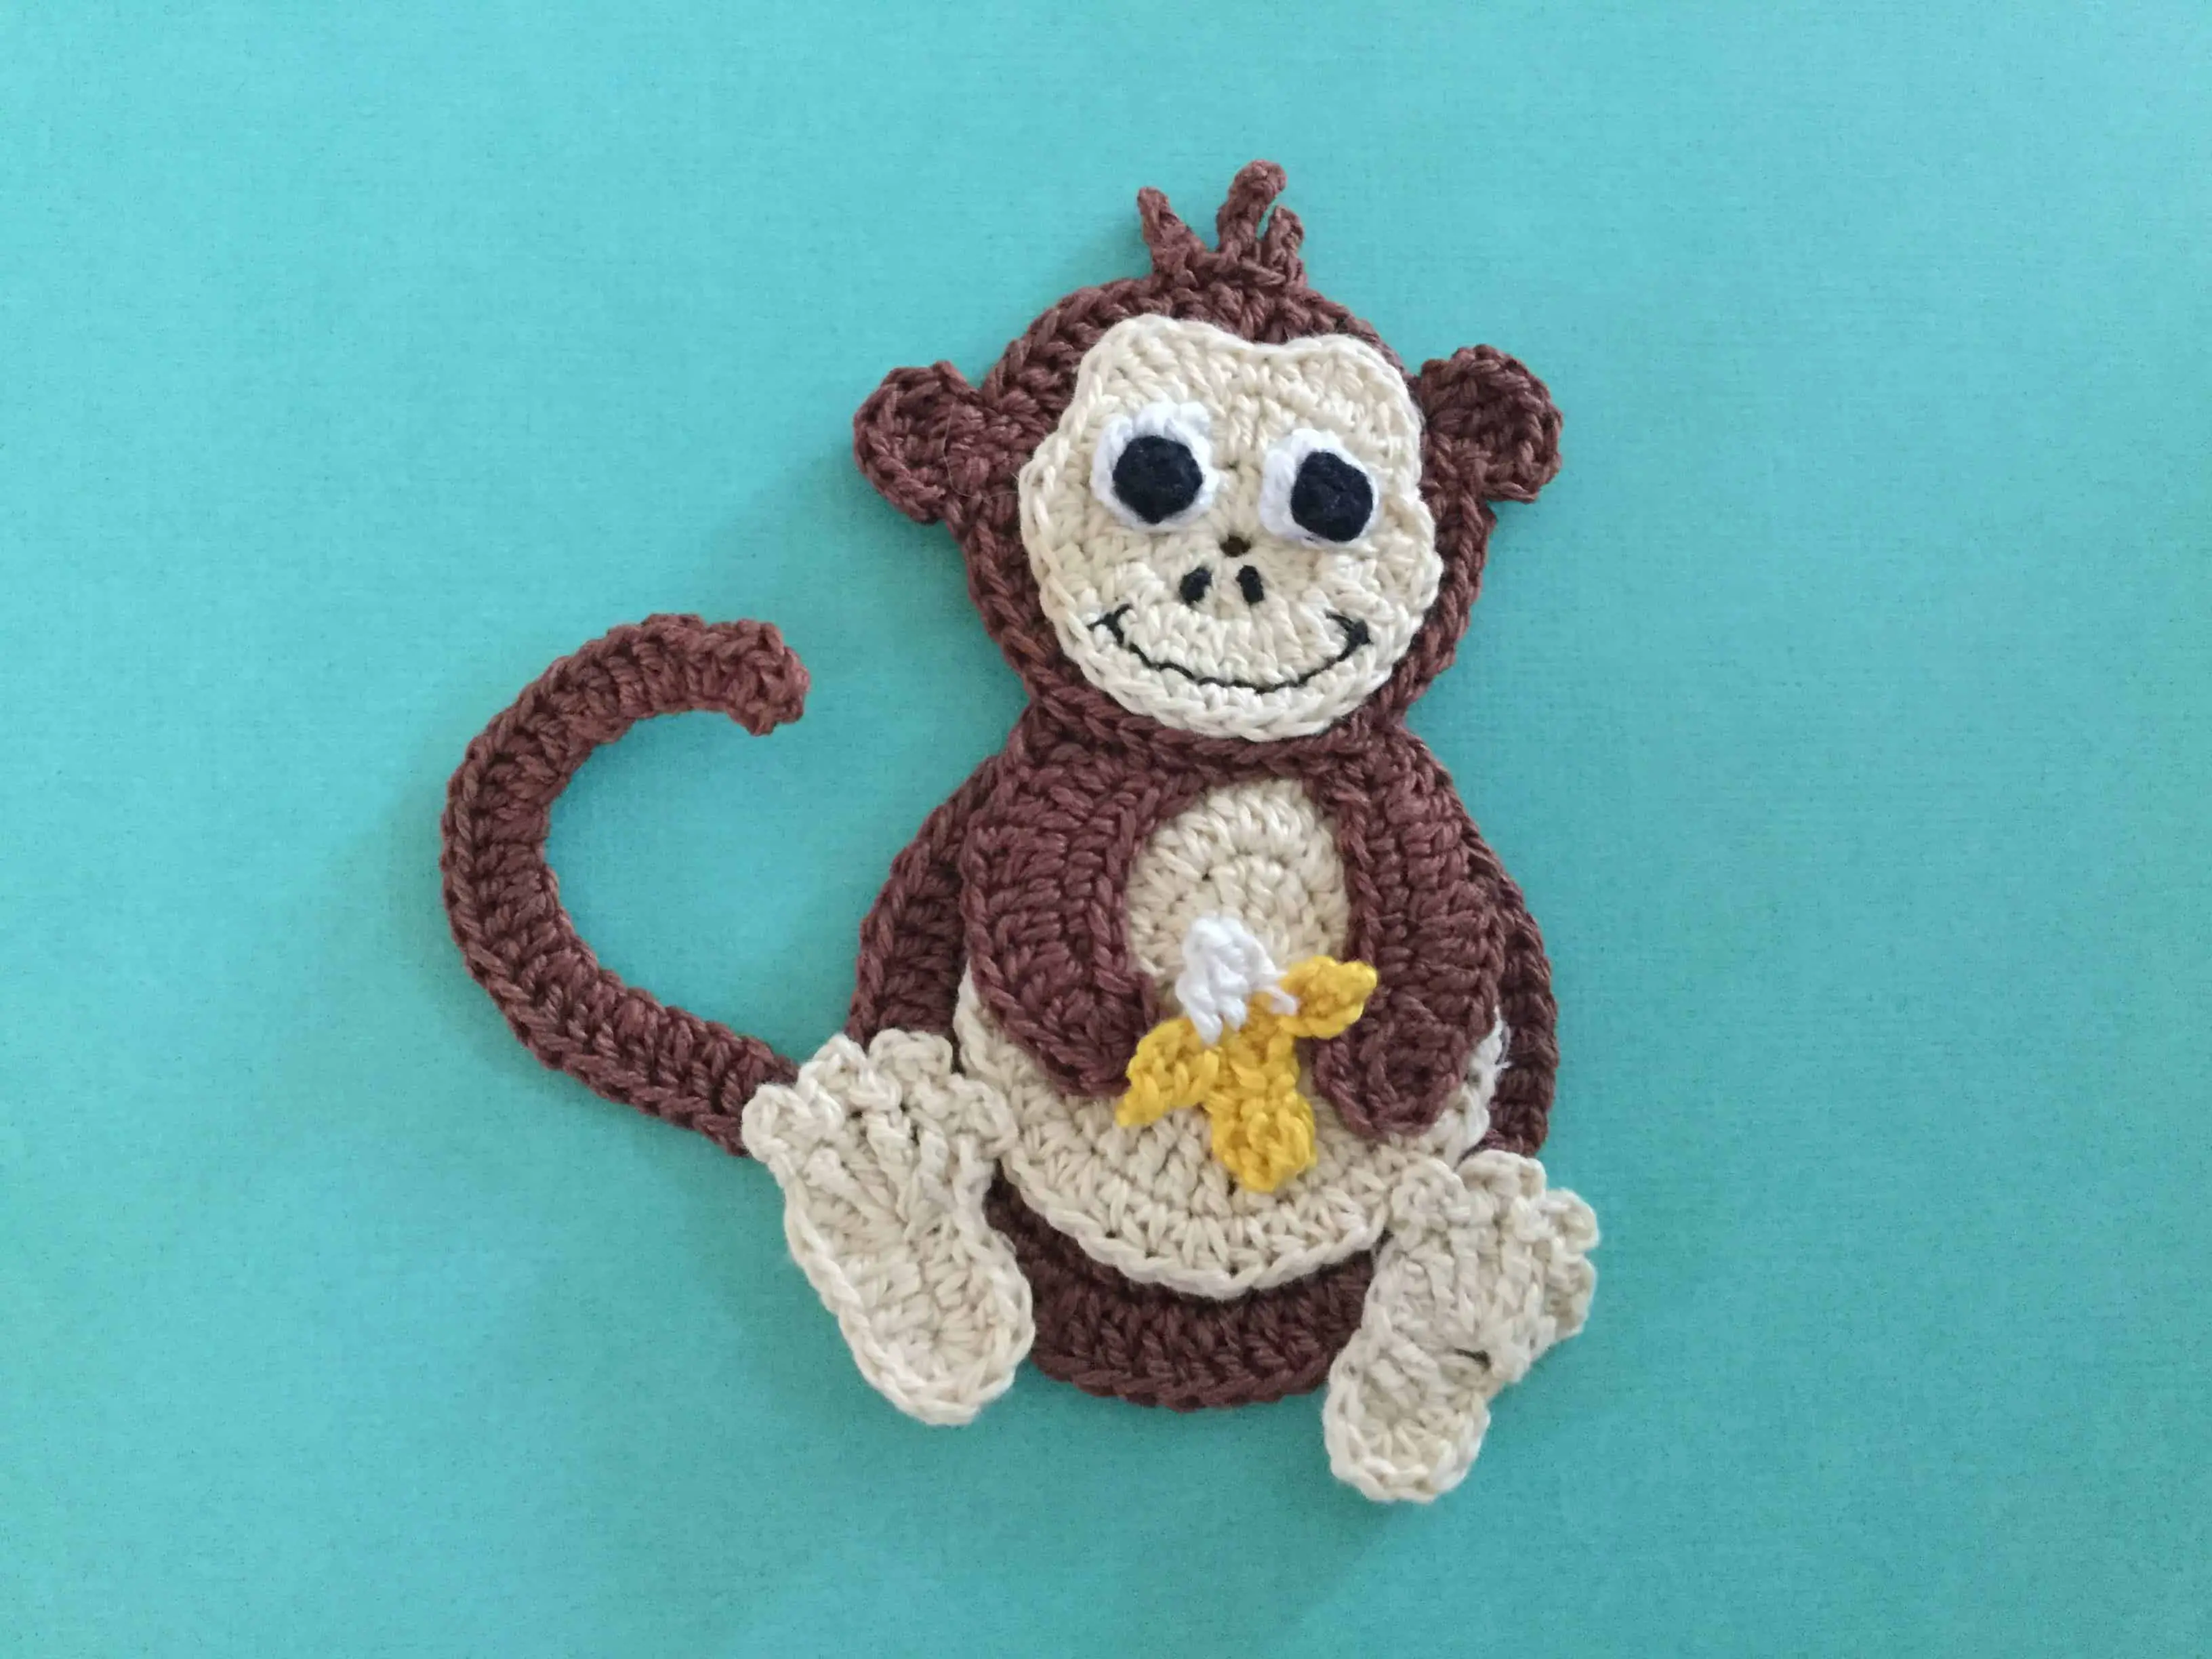 Finished crochet monkey with hair landscape